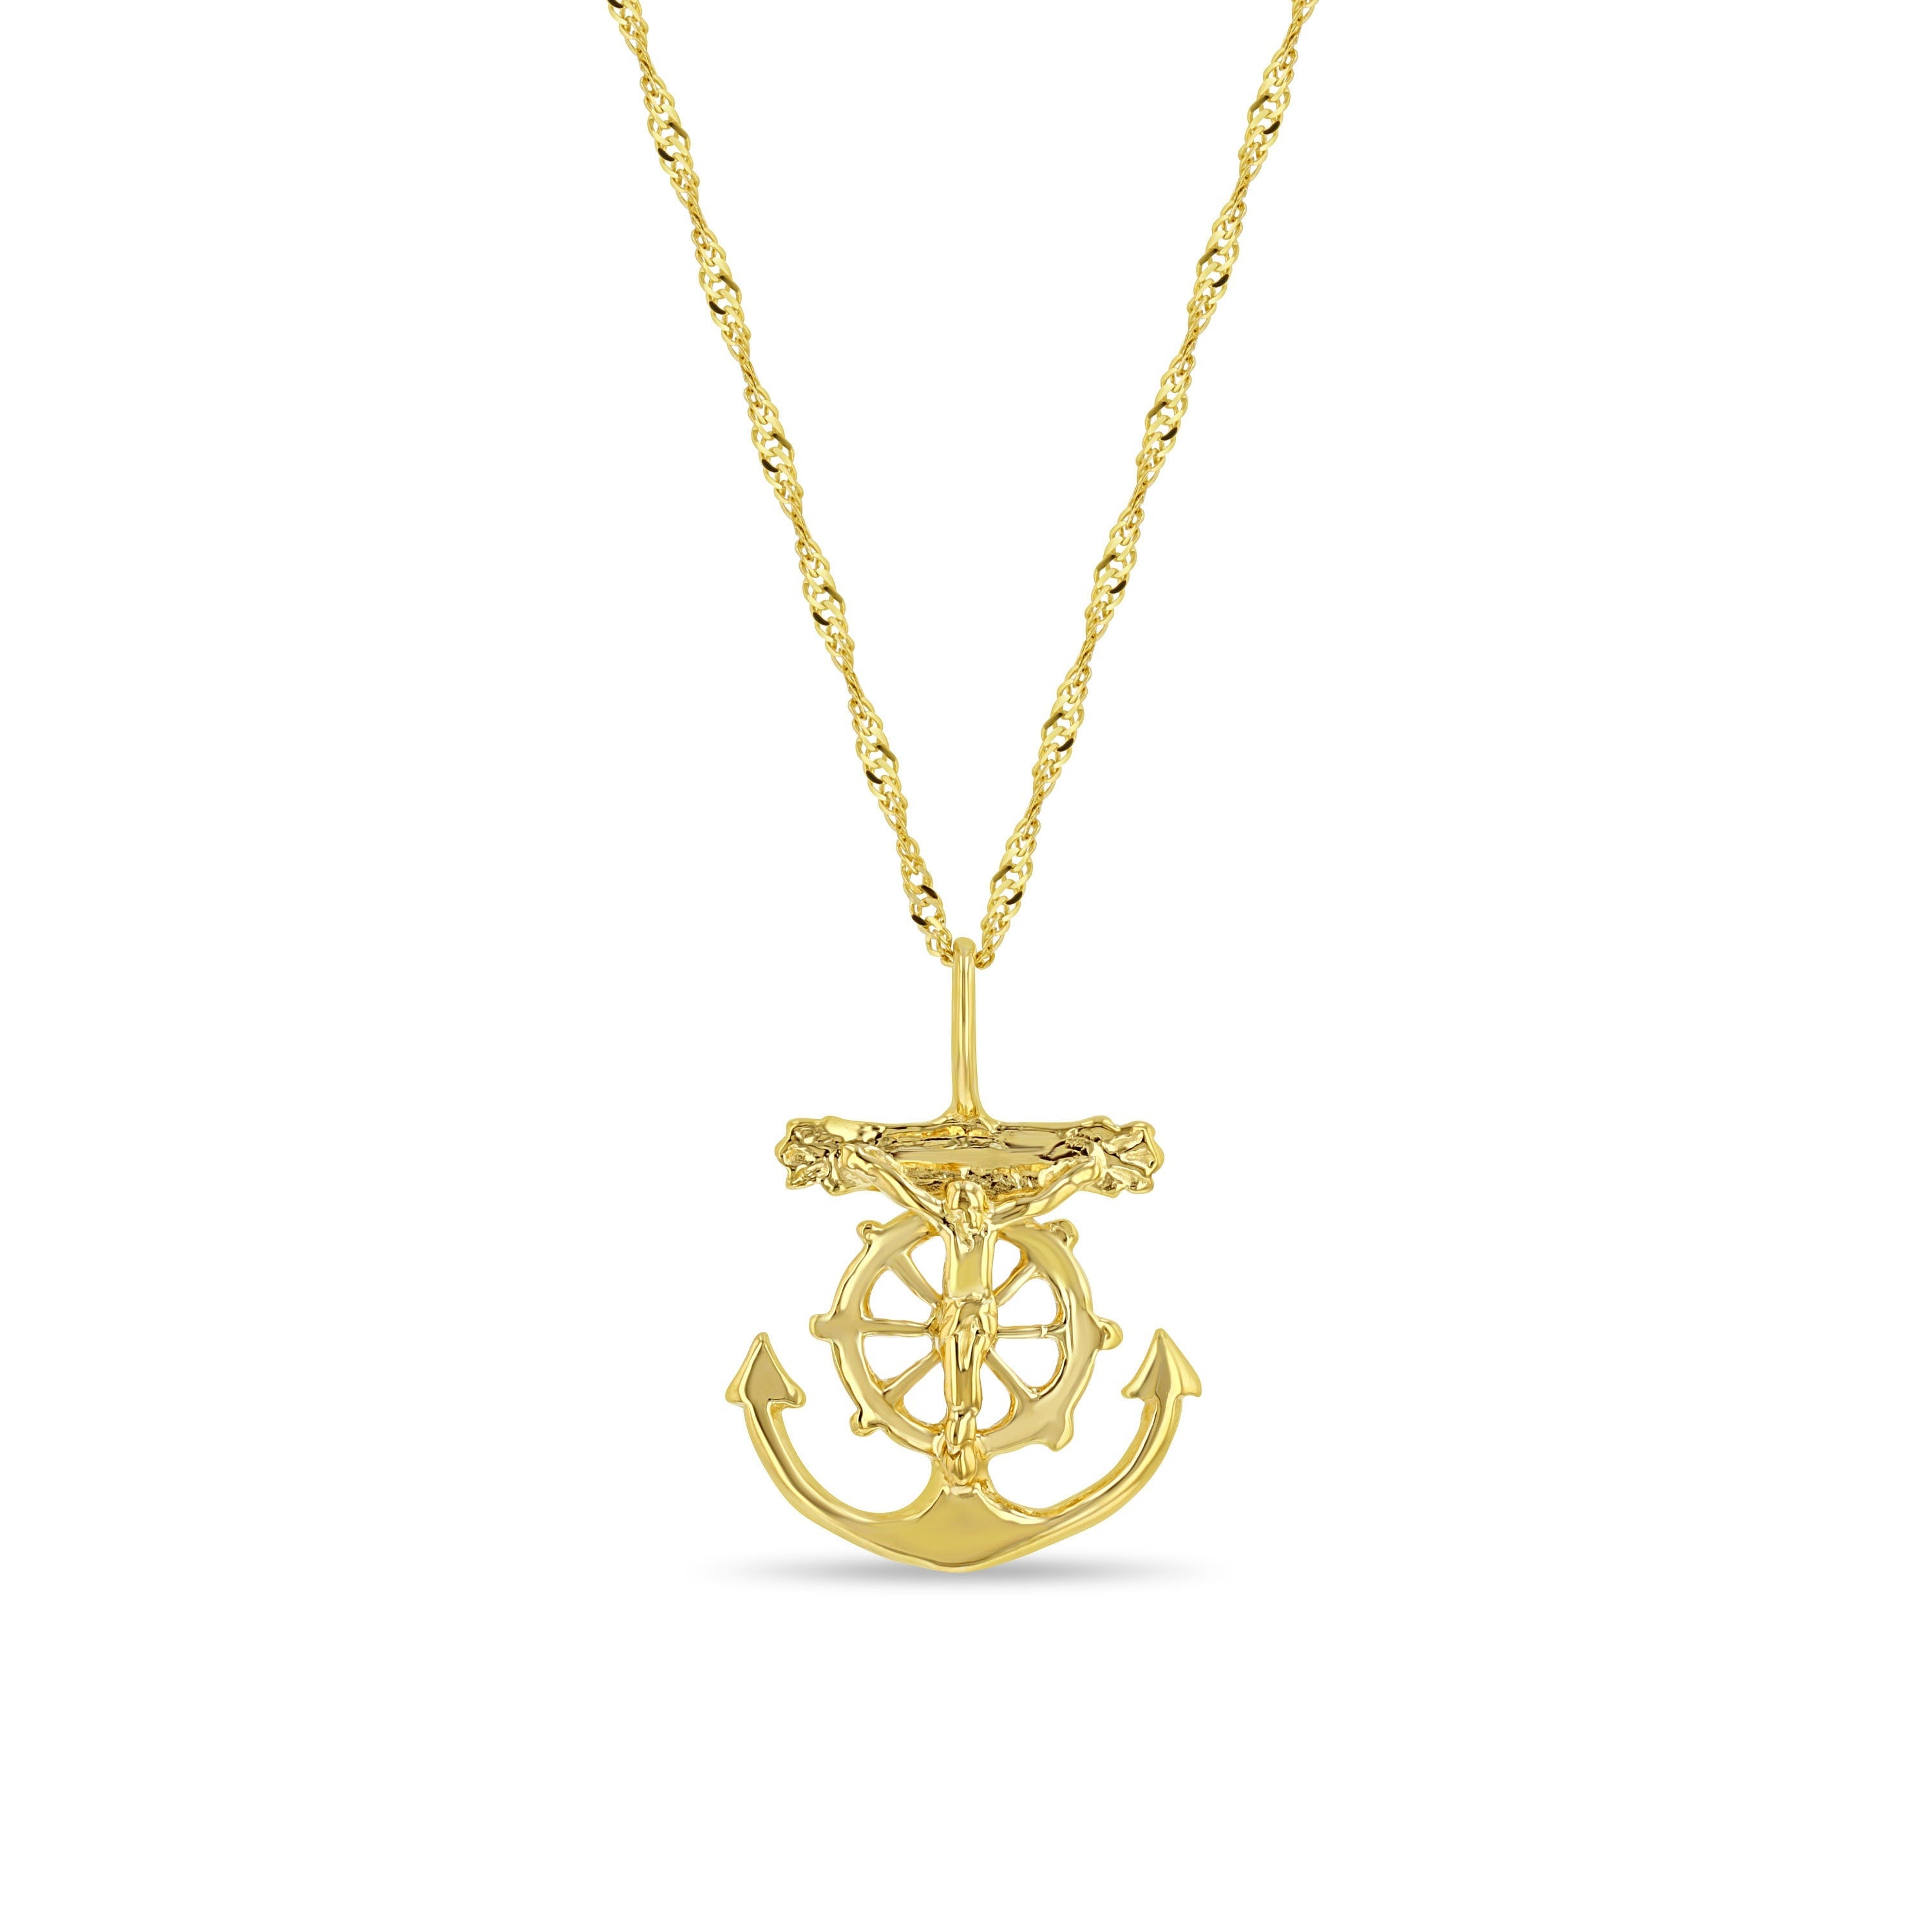 14k solid gold mariner cross pendant on 18" solid gold chain